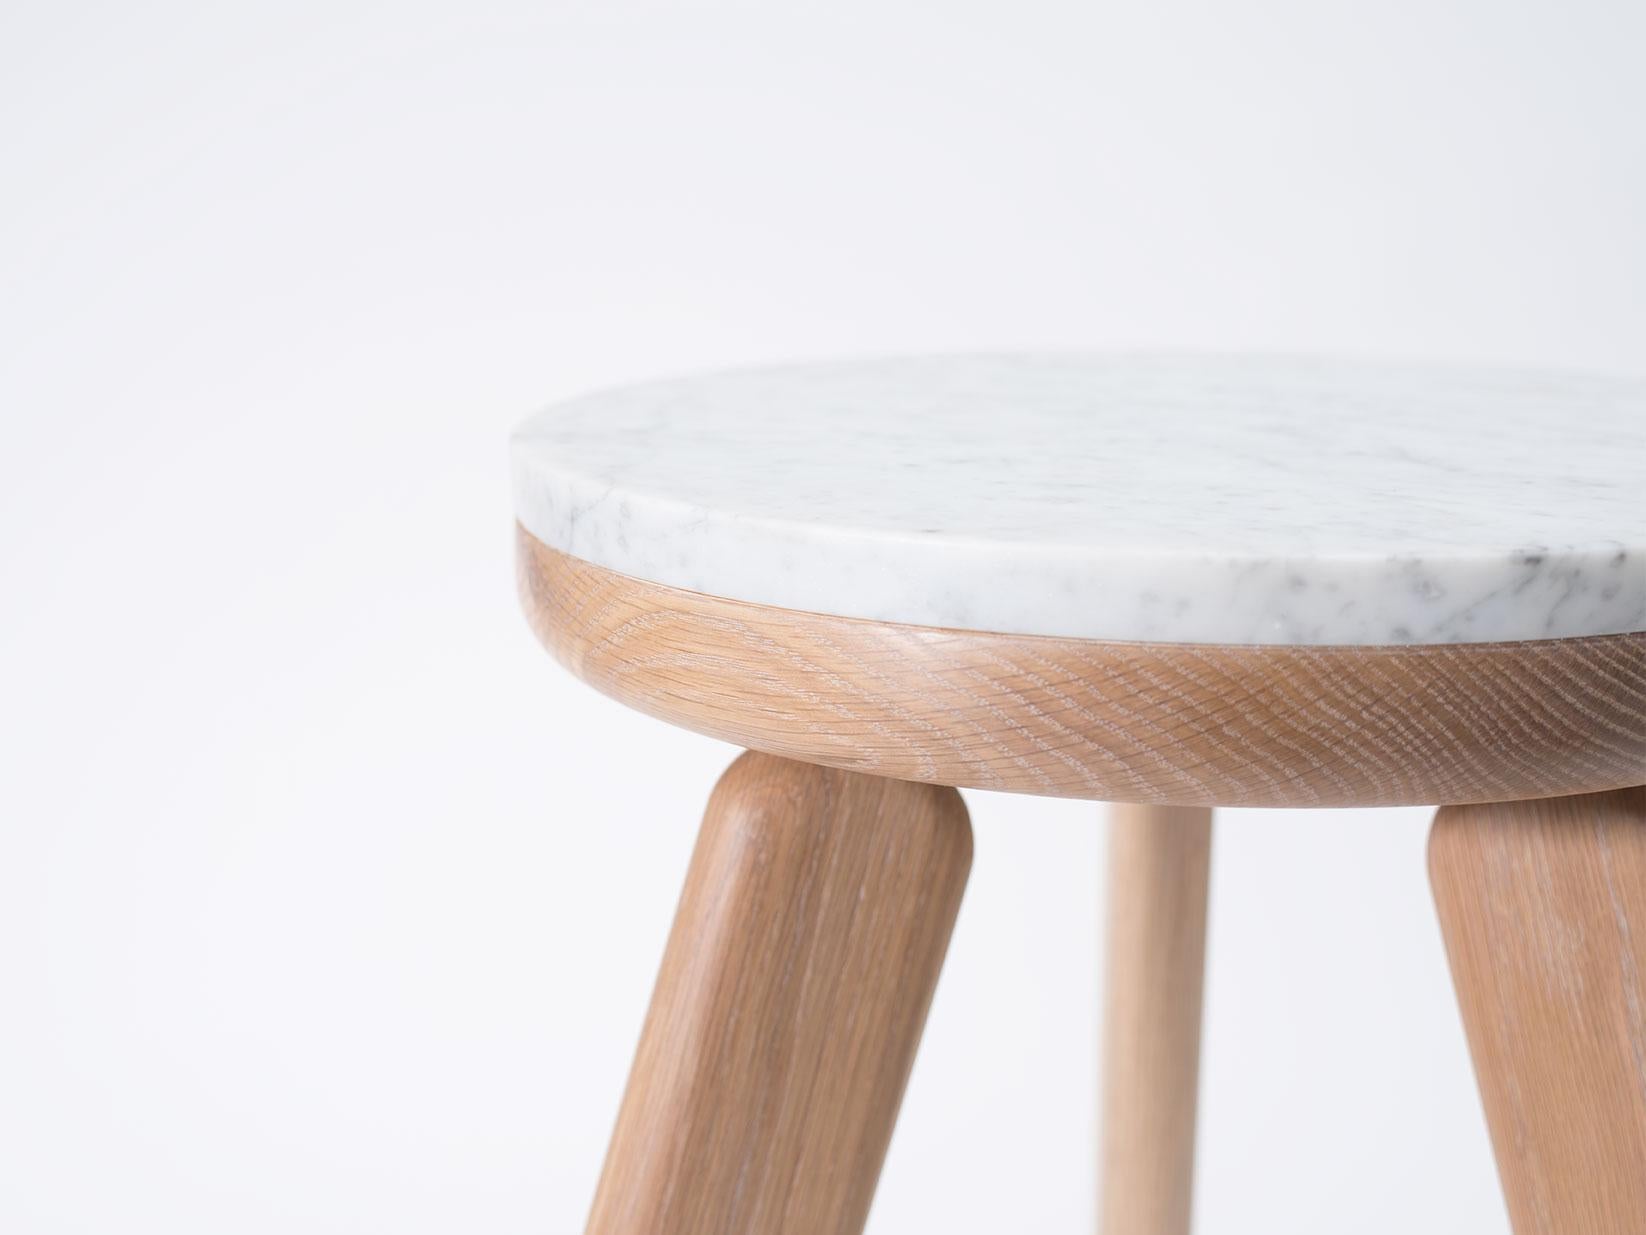 The Stele side table is handcrafted out of white oak and Carrara marble. Each table in the Stele series features a unique sculptural leg style. The Stele series utilizes and mix of stone and wood that compliments the properties of both materials;